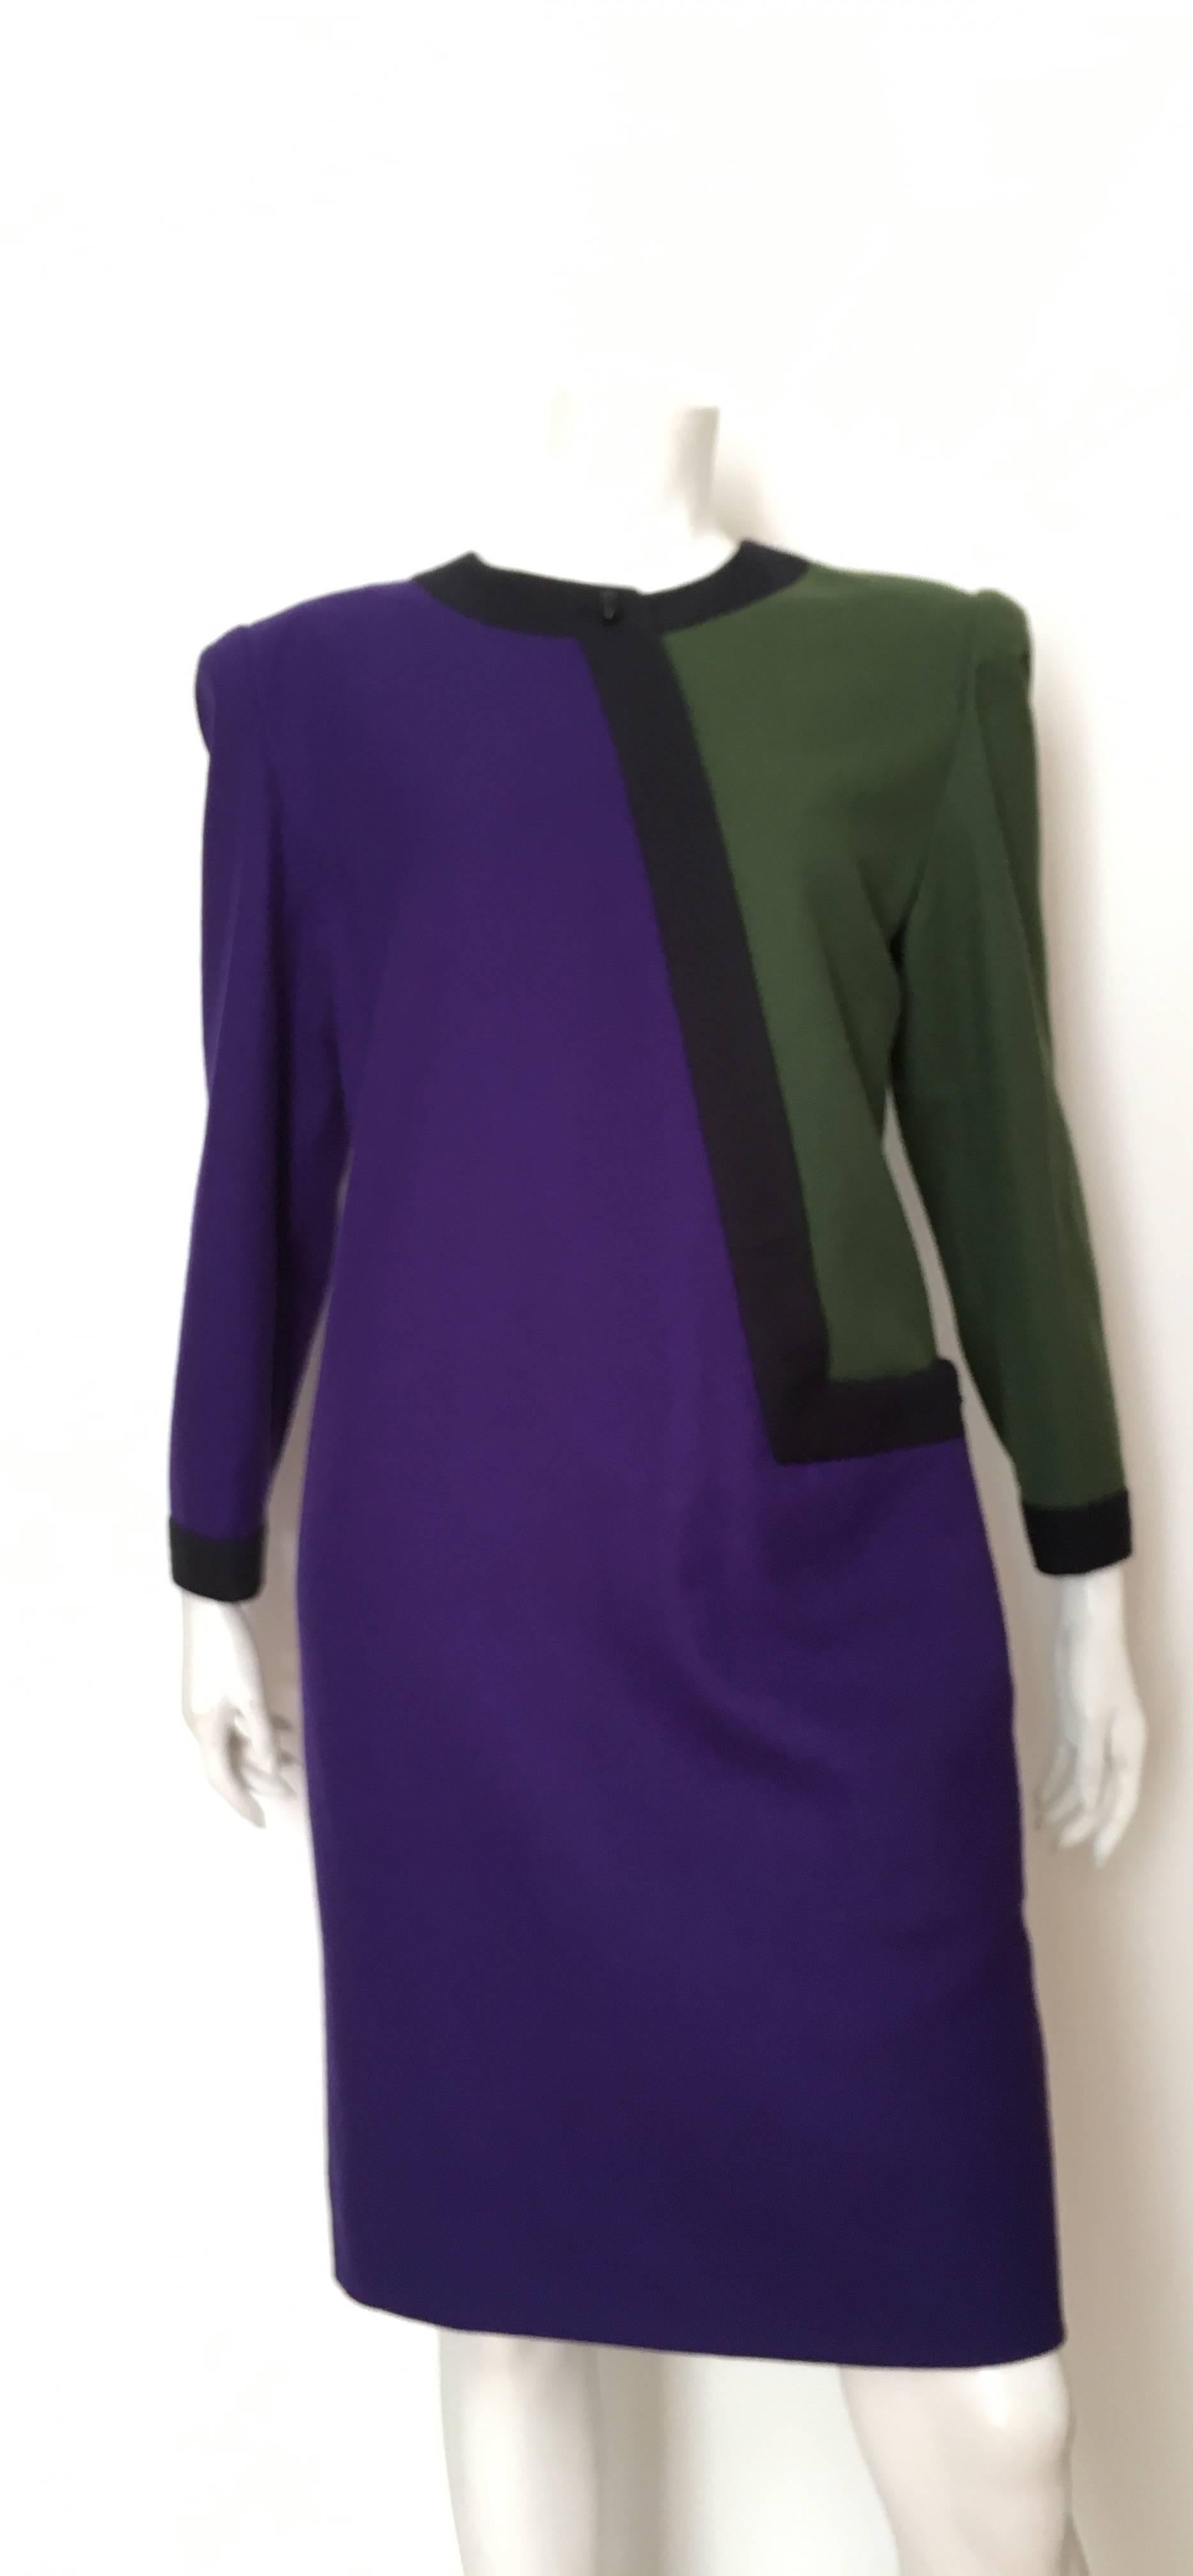 Nina Ricci Boutique Paris 1970s very modern abstract wool dress with one single pocket will fit an USA size 10. This silhouette is meant to be boxy, meant to be bold. The design is like a piece of contemporary art, just breathtaking. Dress is lined.